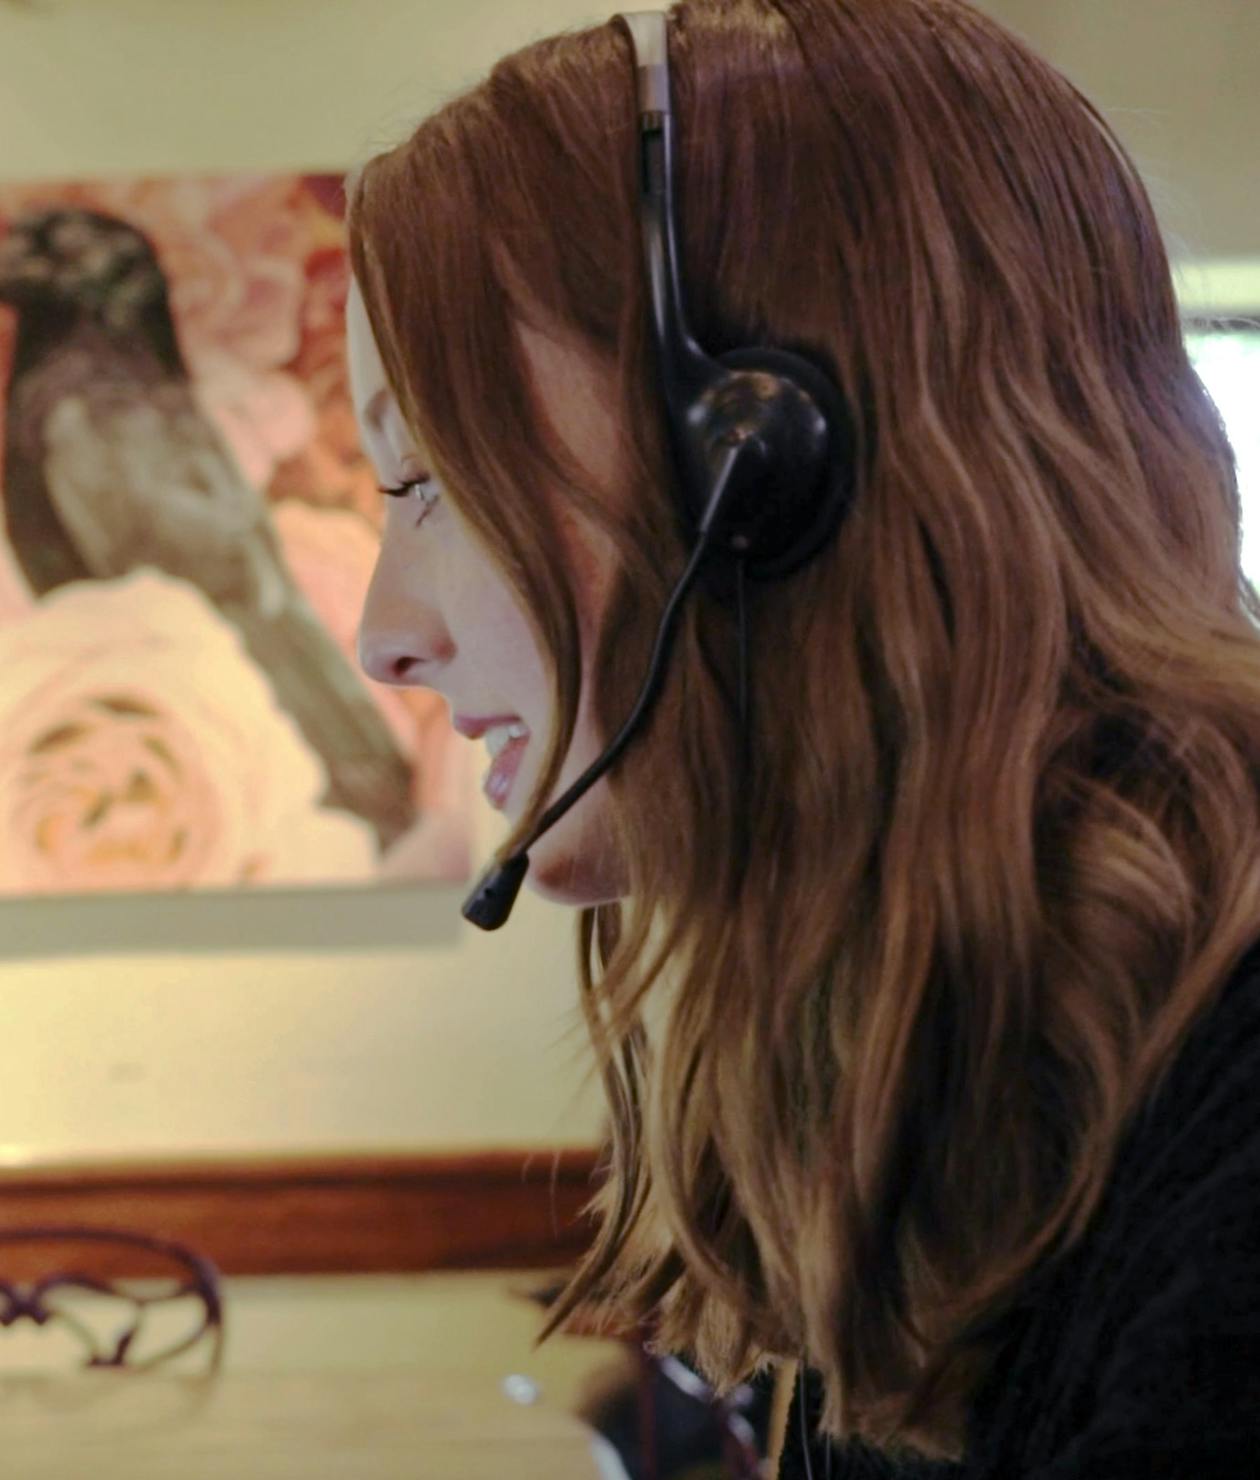 A redheaded woman's side profile as she works wearing a headset.